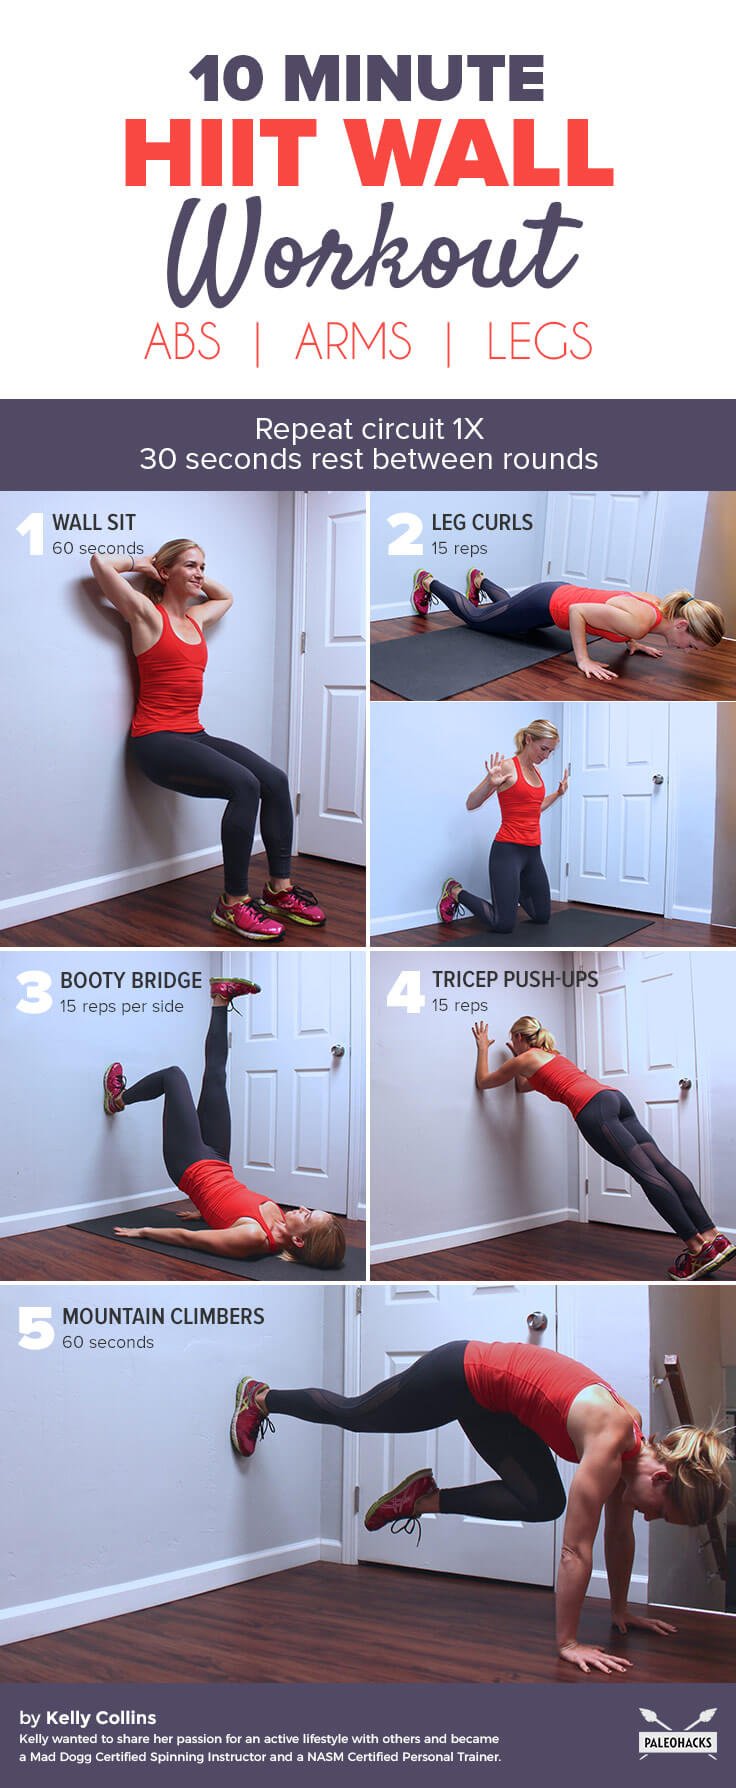 wall workout infographic